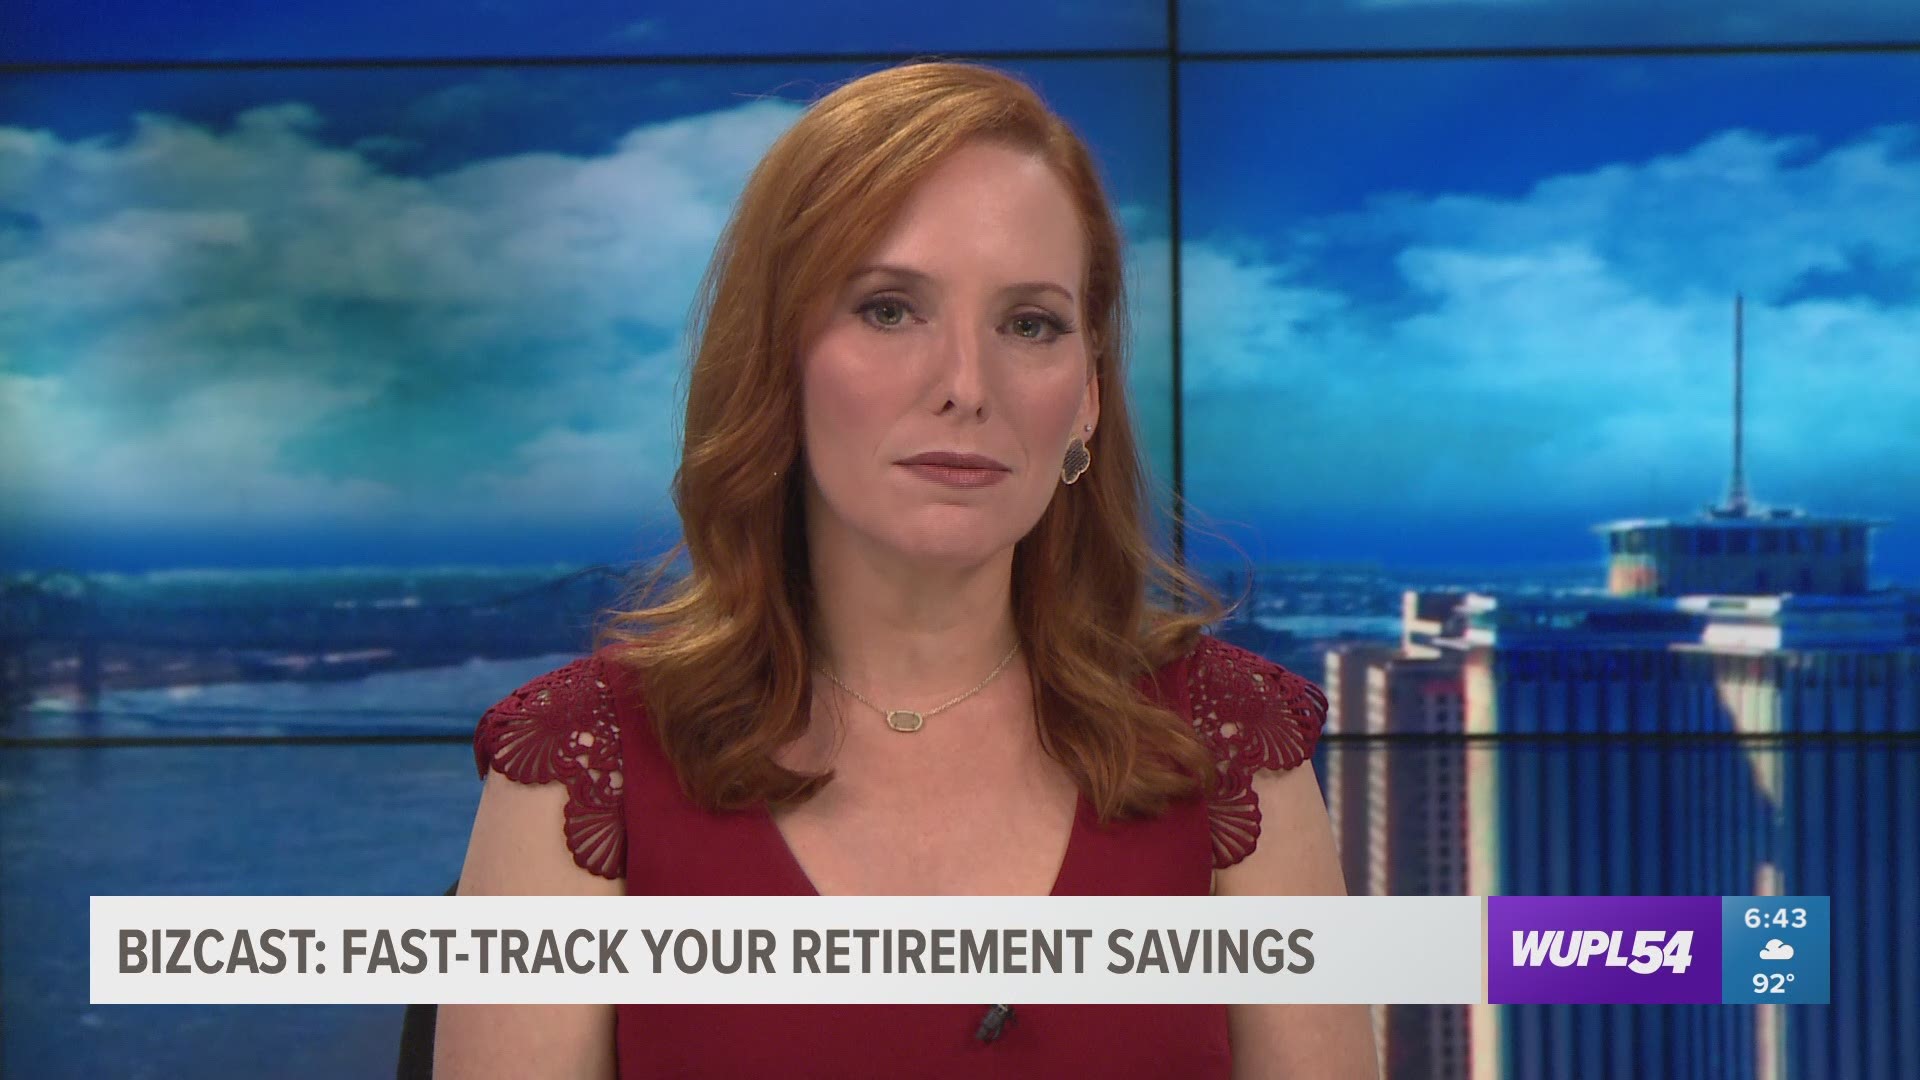 When you dream about retirement, what does it look like? BizNewOrleans.com's Leslie Snadowsky has five ways to fast-track your retirement savings and find investment vehicles that fit your goals and needs.